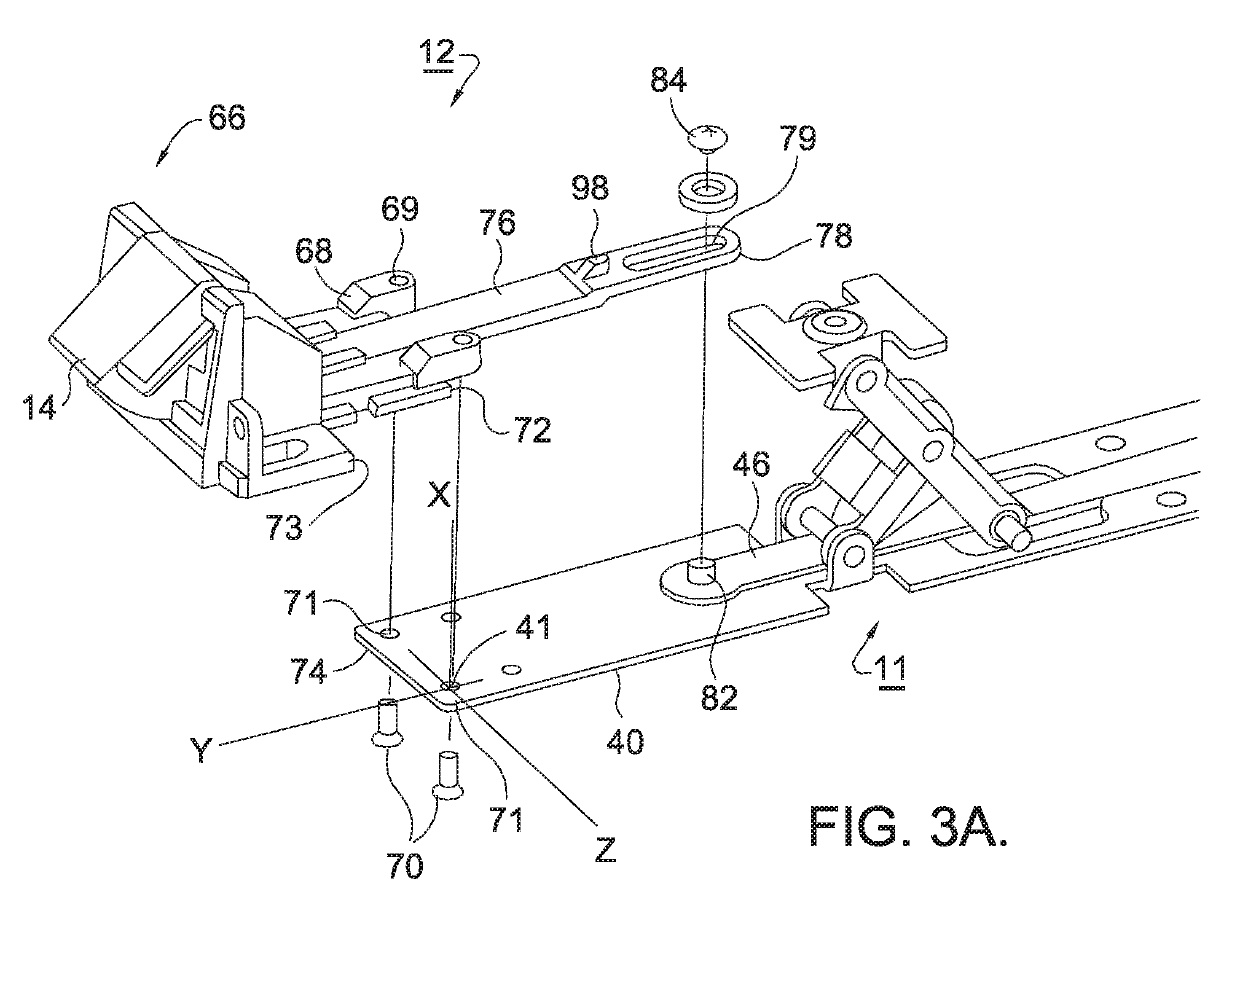 Interchangeable Latch Assembly for an Exit Device